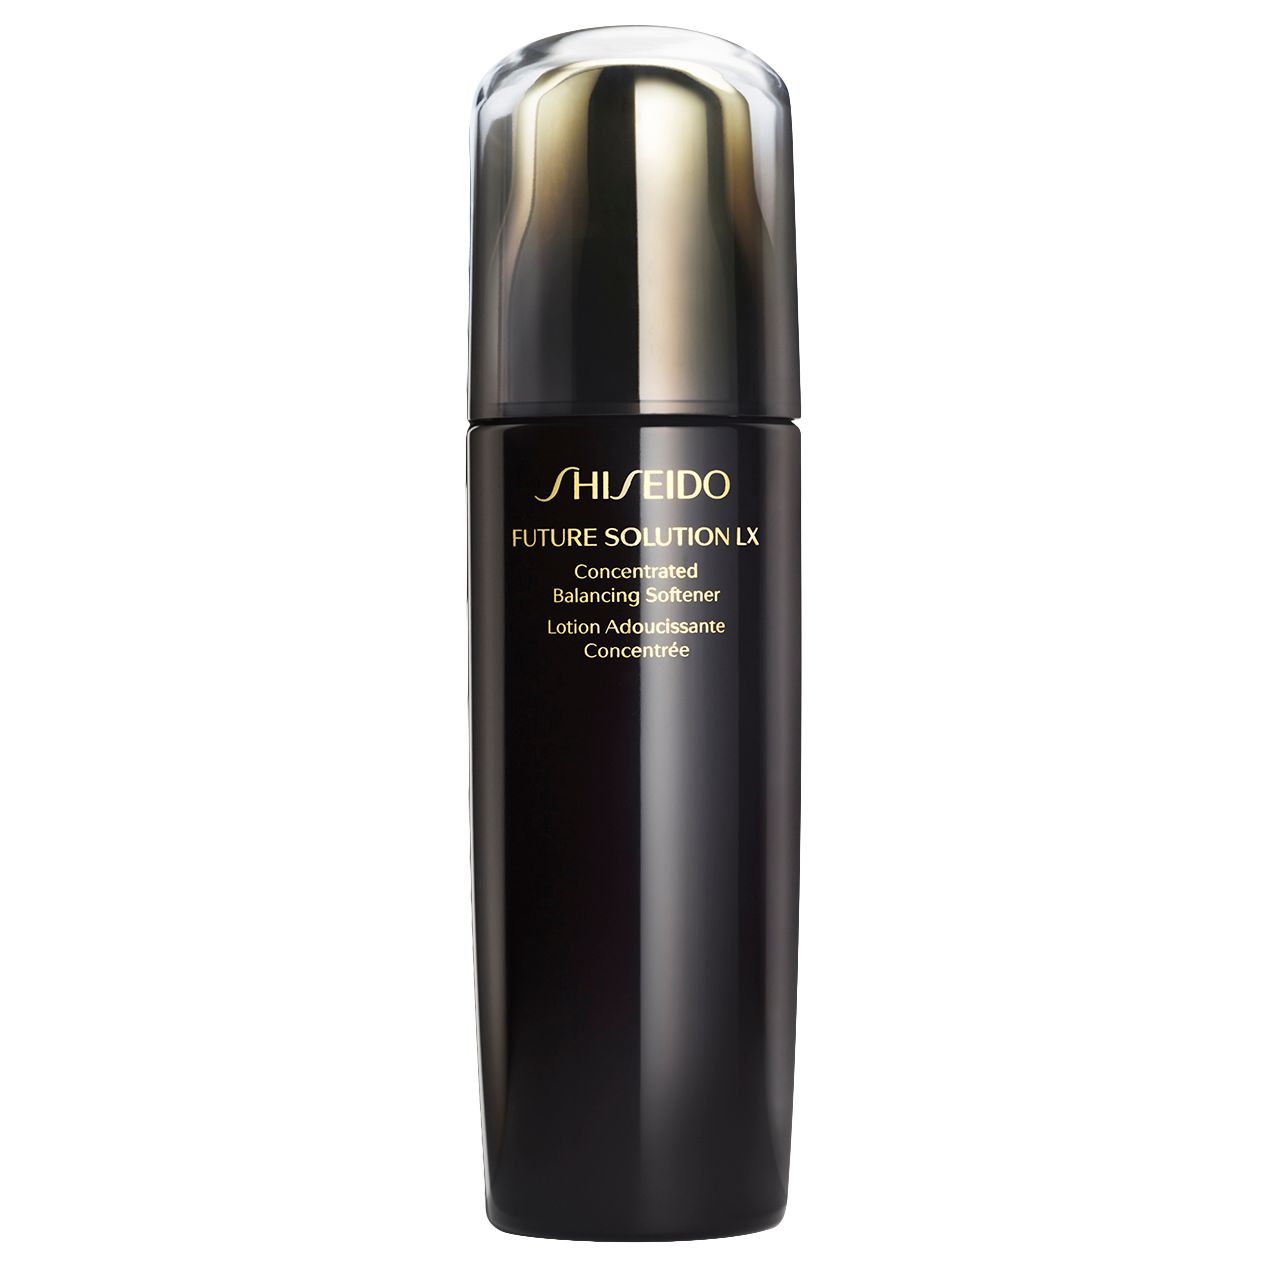 Shiseido Future Solution LX Concentrated Balancing Softener, 170ml 1